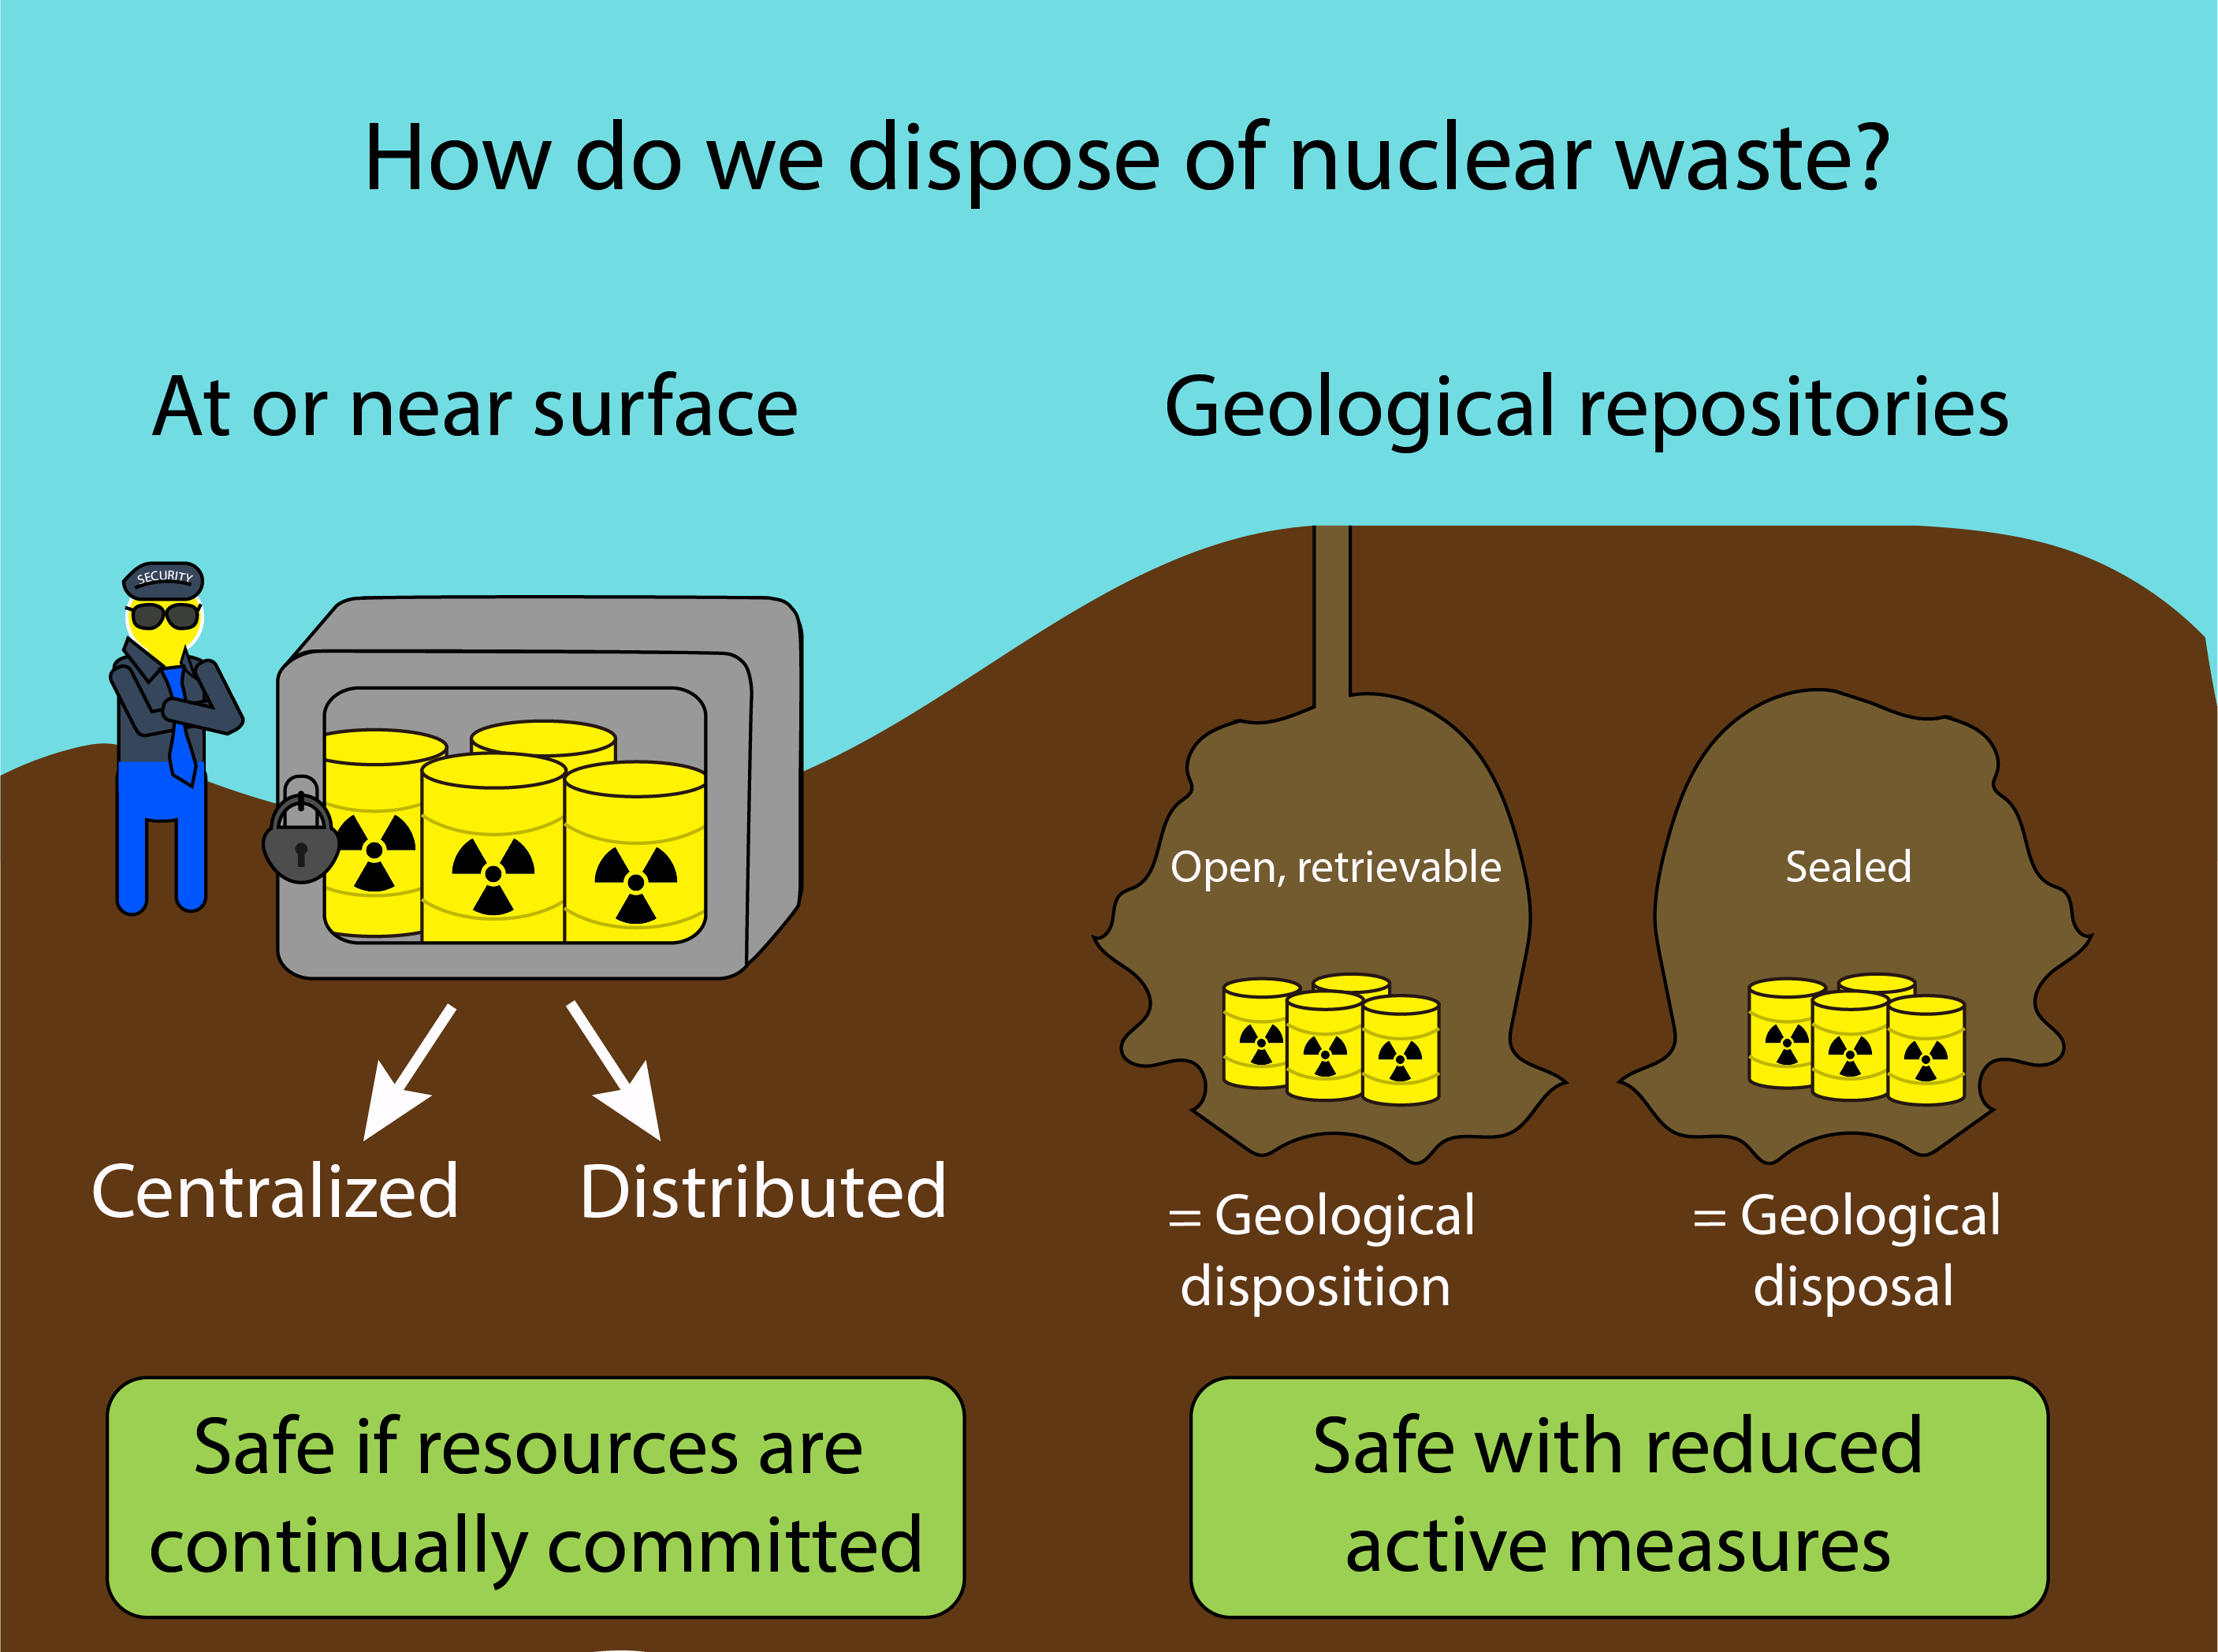 how is radioactive nuclear waste disposed of and stored safely underground